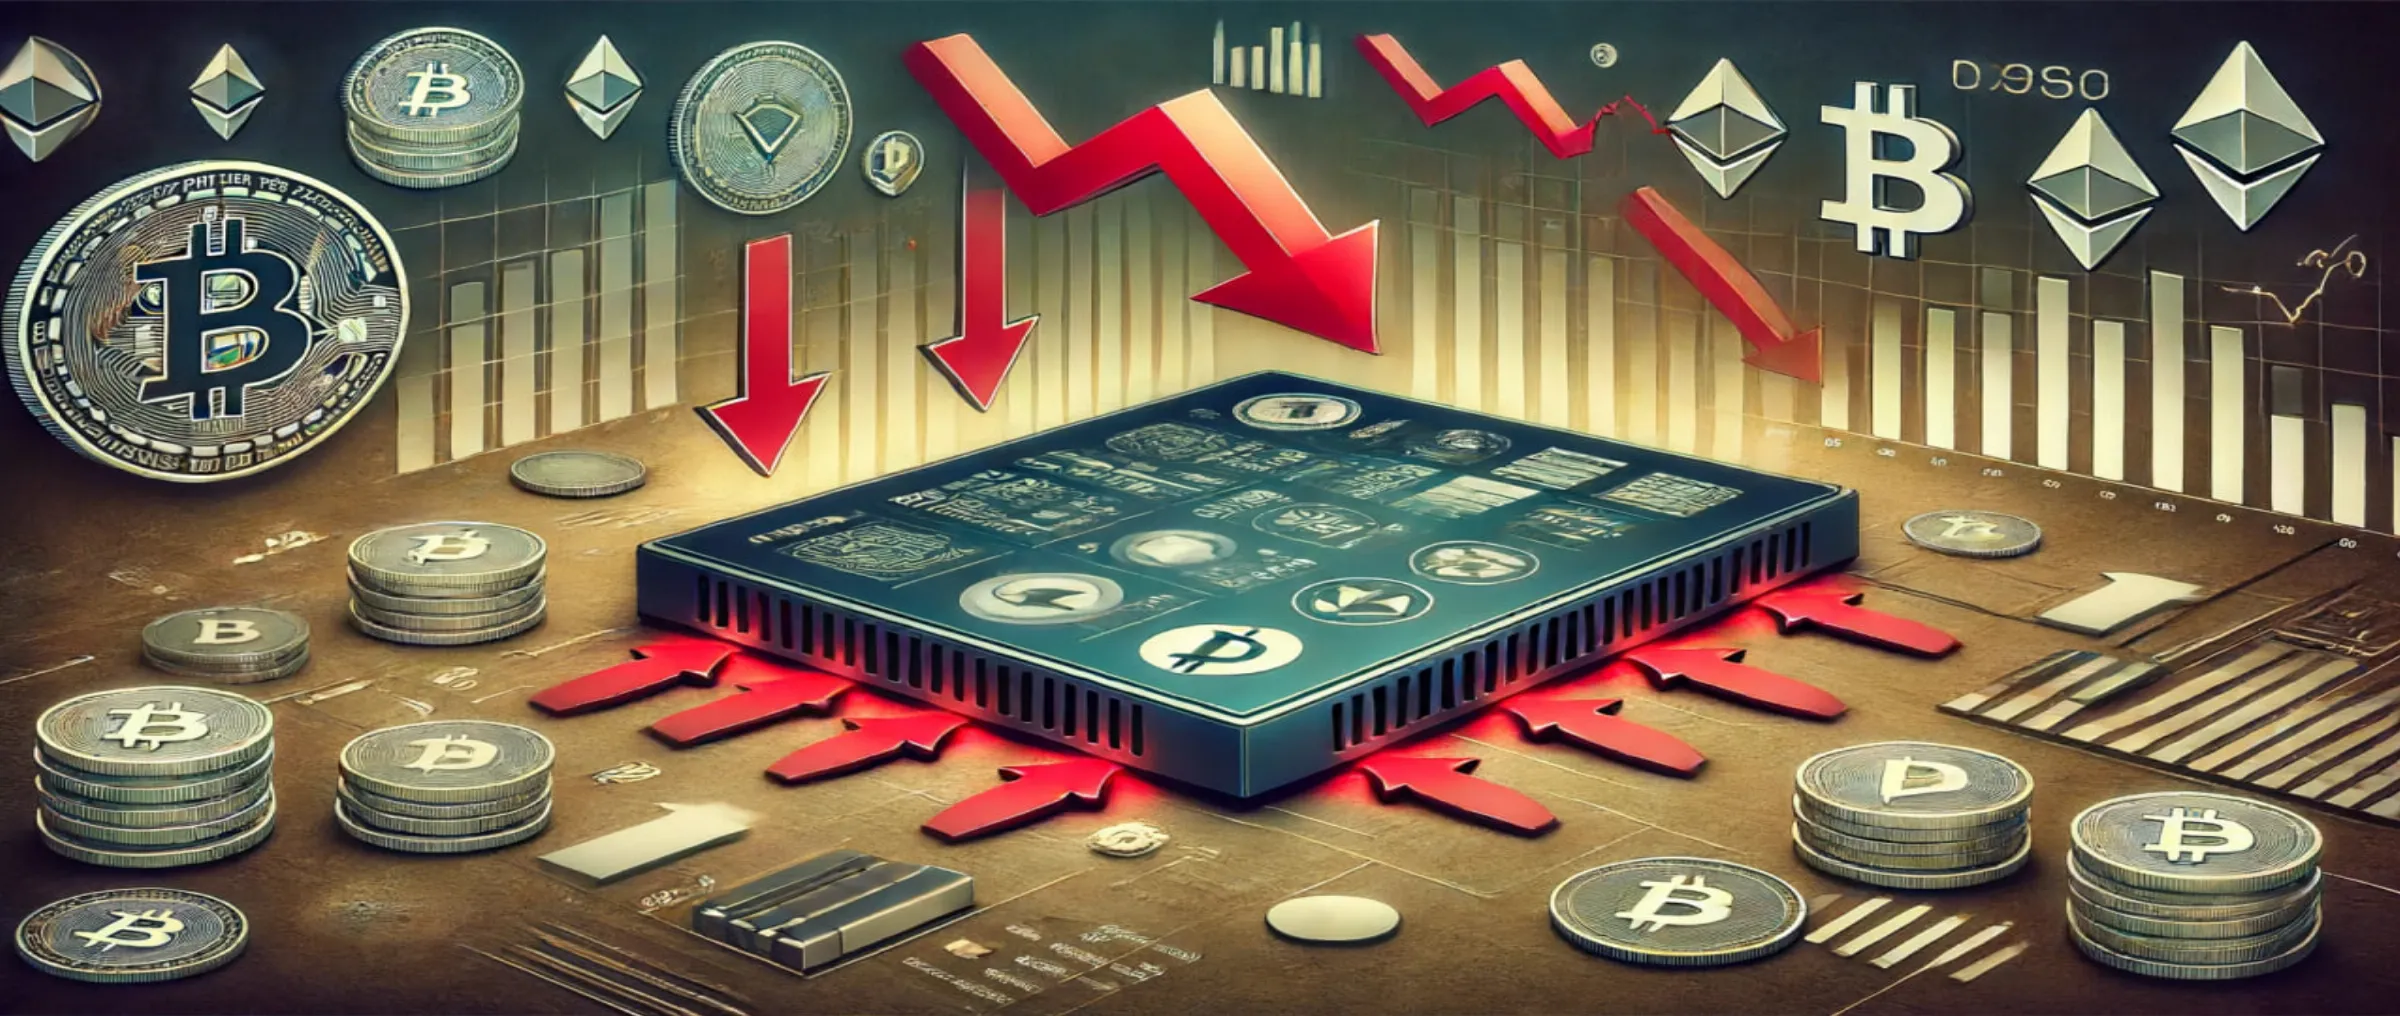 The weekly outflow from crypto funds amounted to $600 million